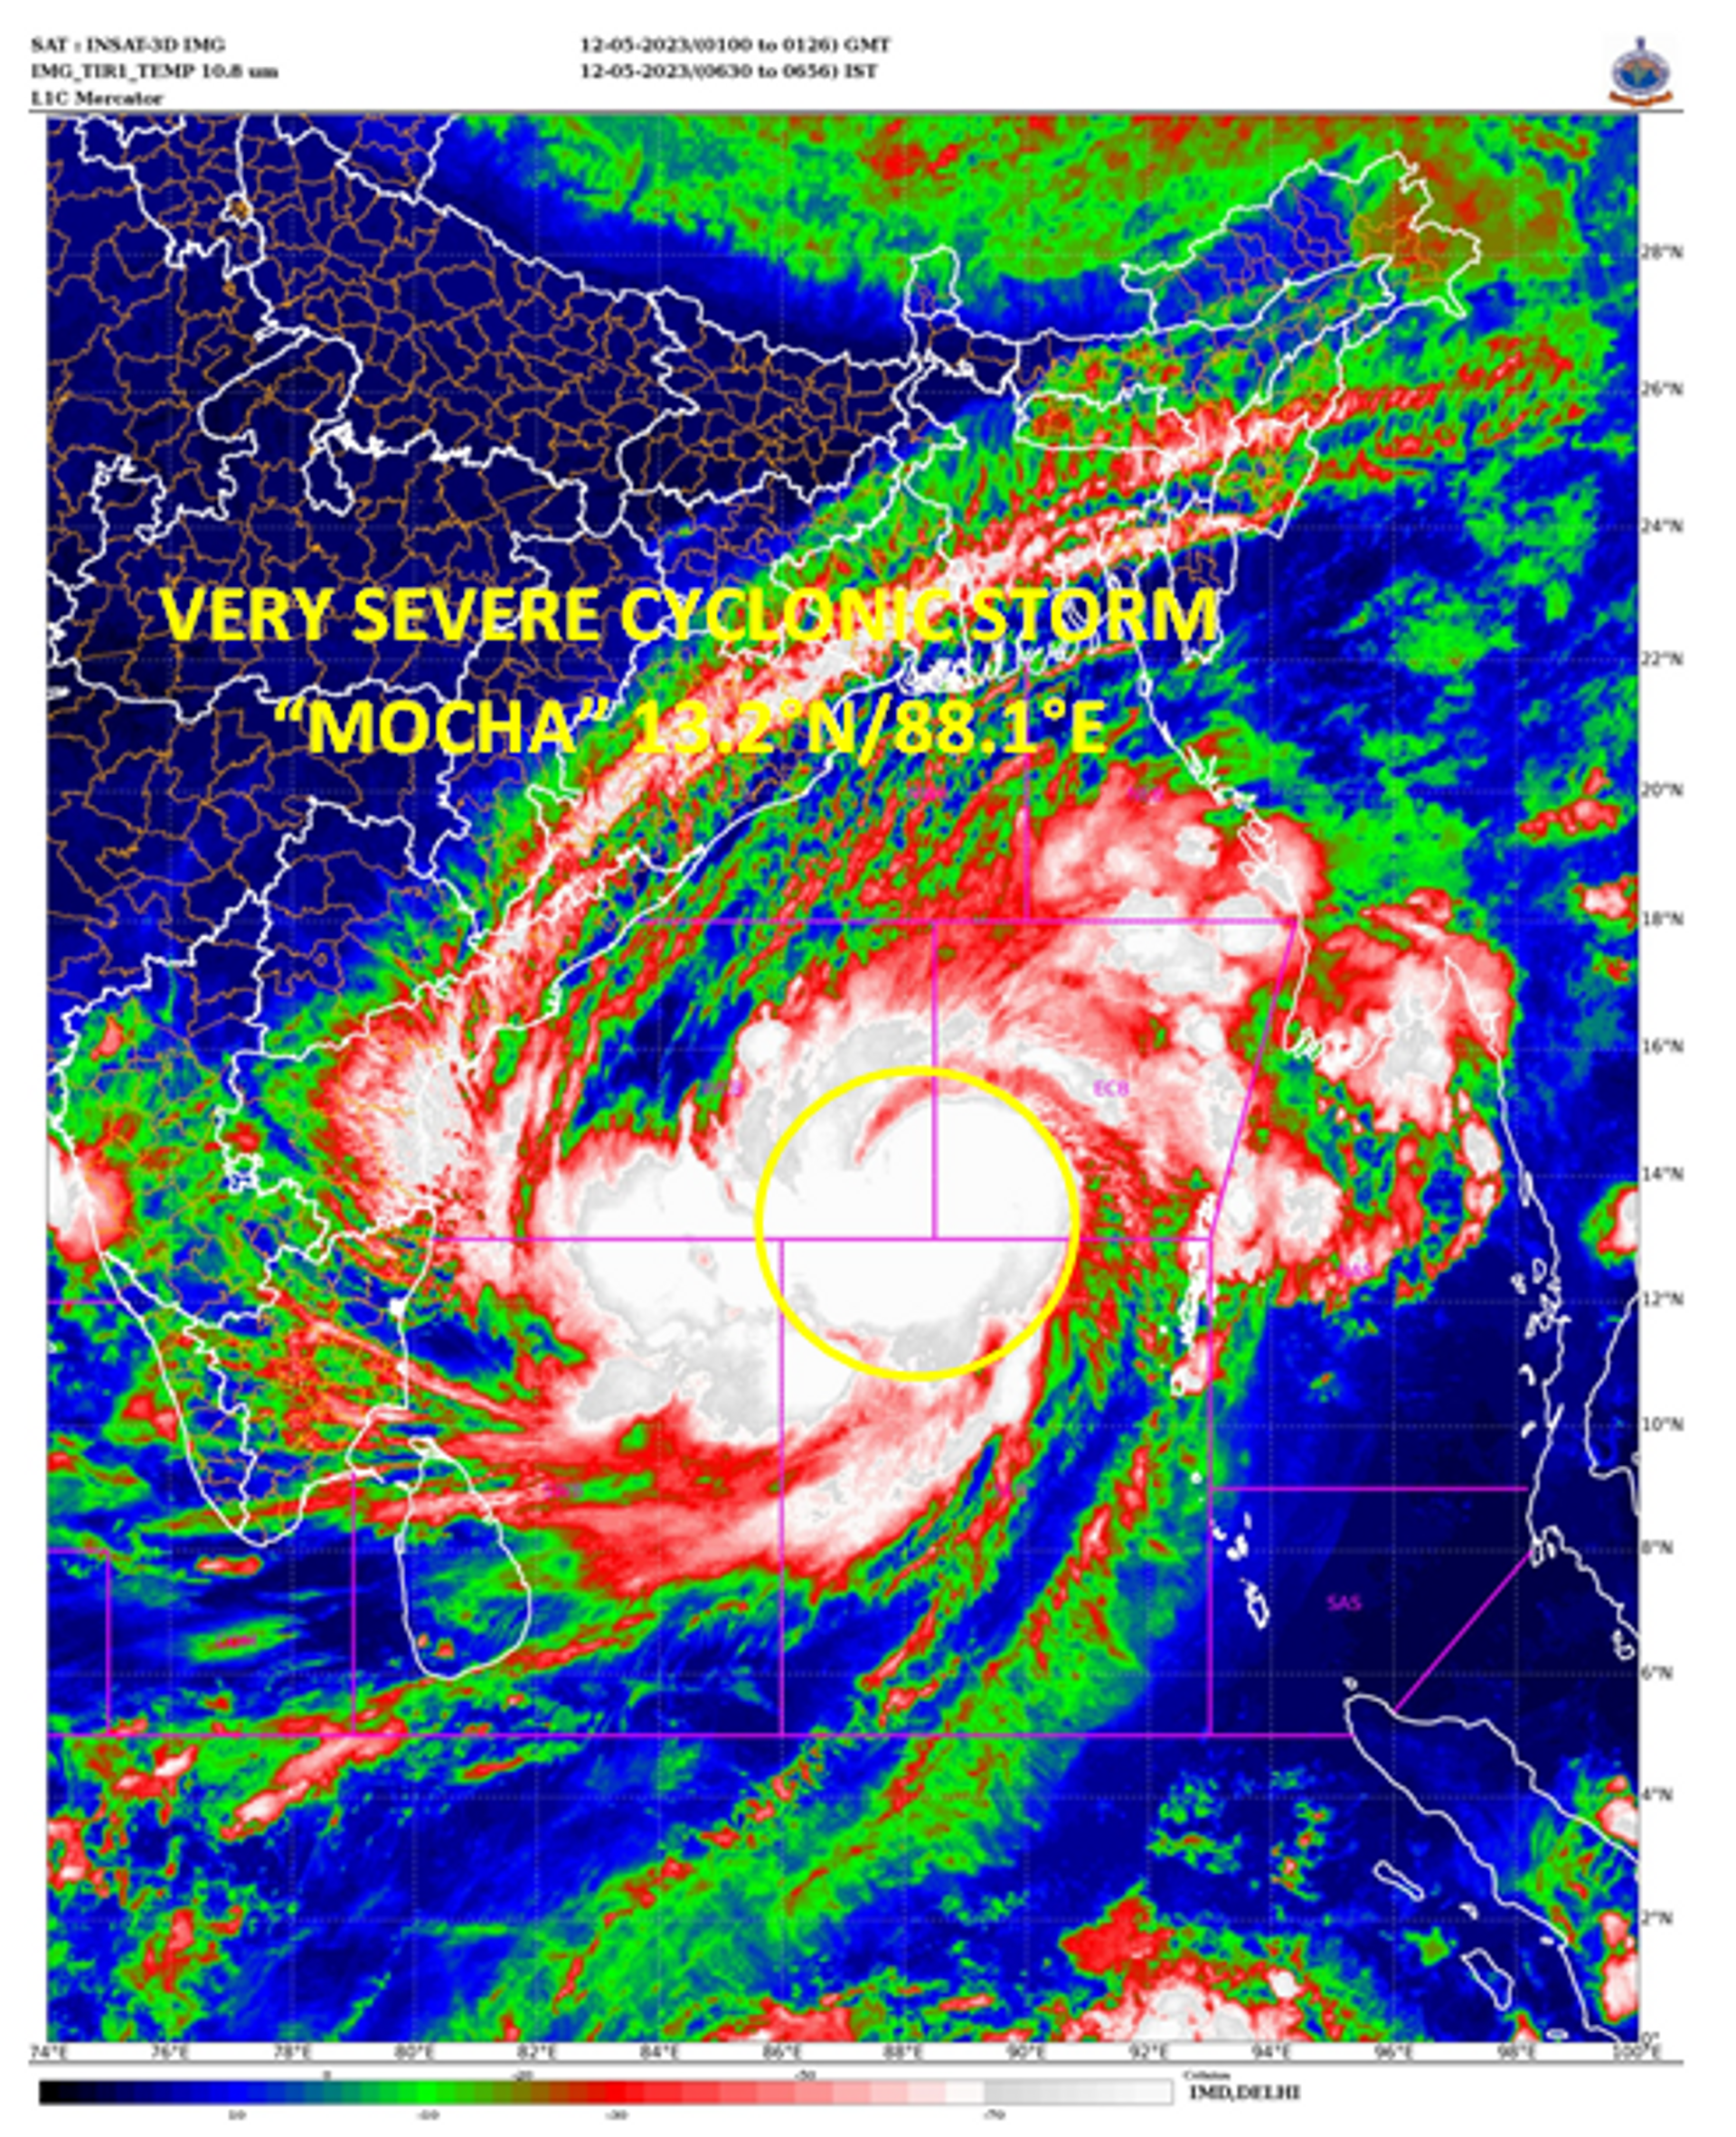 The SCS “Mocha intensified into a Very Severe Cyclonic Storm, lay centered at 0530 hours IST of 12th May 2023 over Central adjoining Southeast Bay of Bengal - Sputnik India, 1920, 12.05.2023